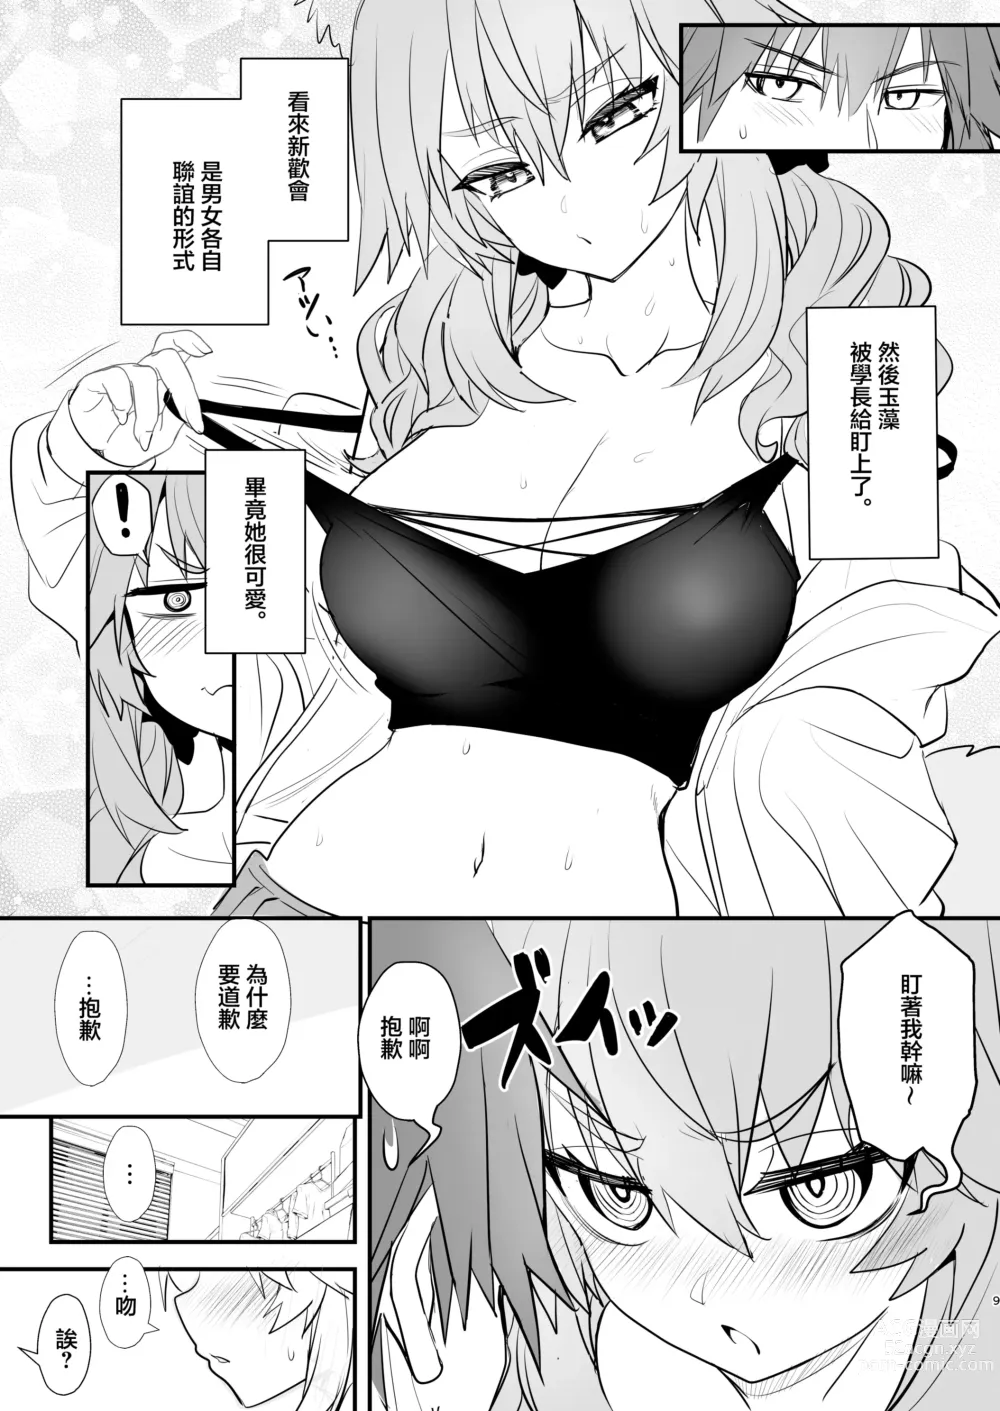 Page 8 of doujinshi 玉藻前大學物語